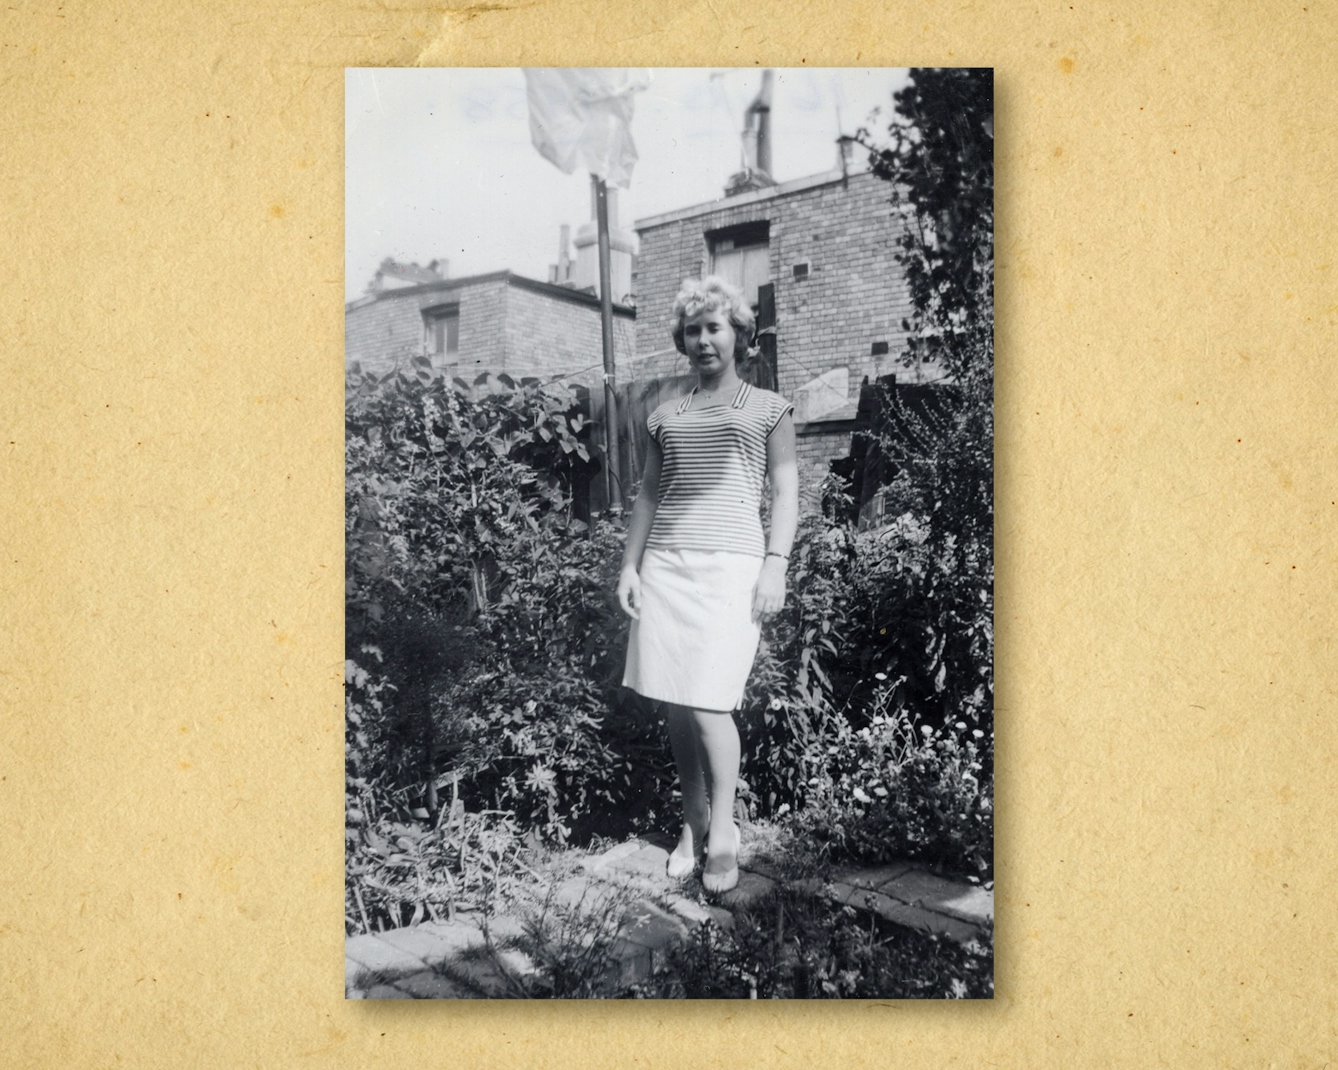 Photograph of a black and white photographic print, resting on a brown paper textured background. The print shows a woman in full length standing in the back garden of a row of houses. She is looking to camera, wearing a white skirt and stripped top. She is surrounded by shrubs and trees. Behind her are brick houses.